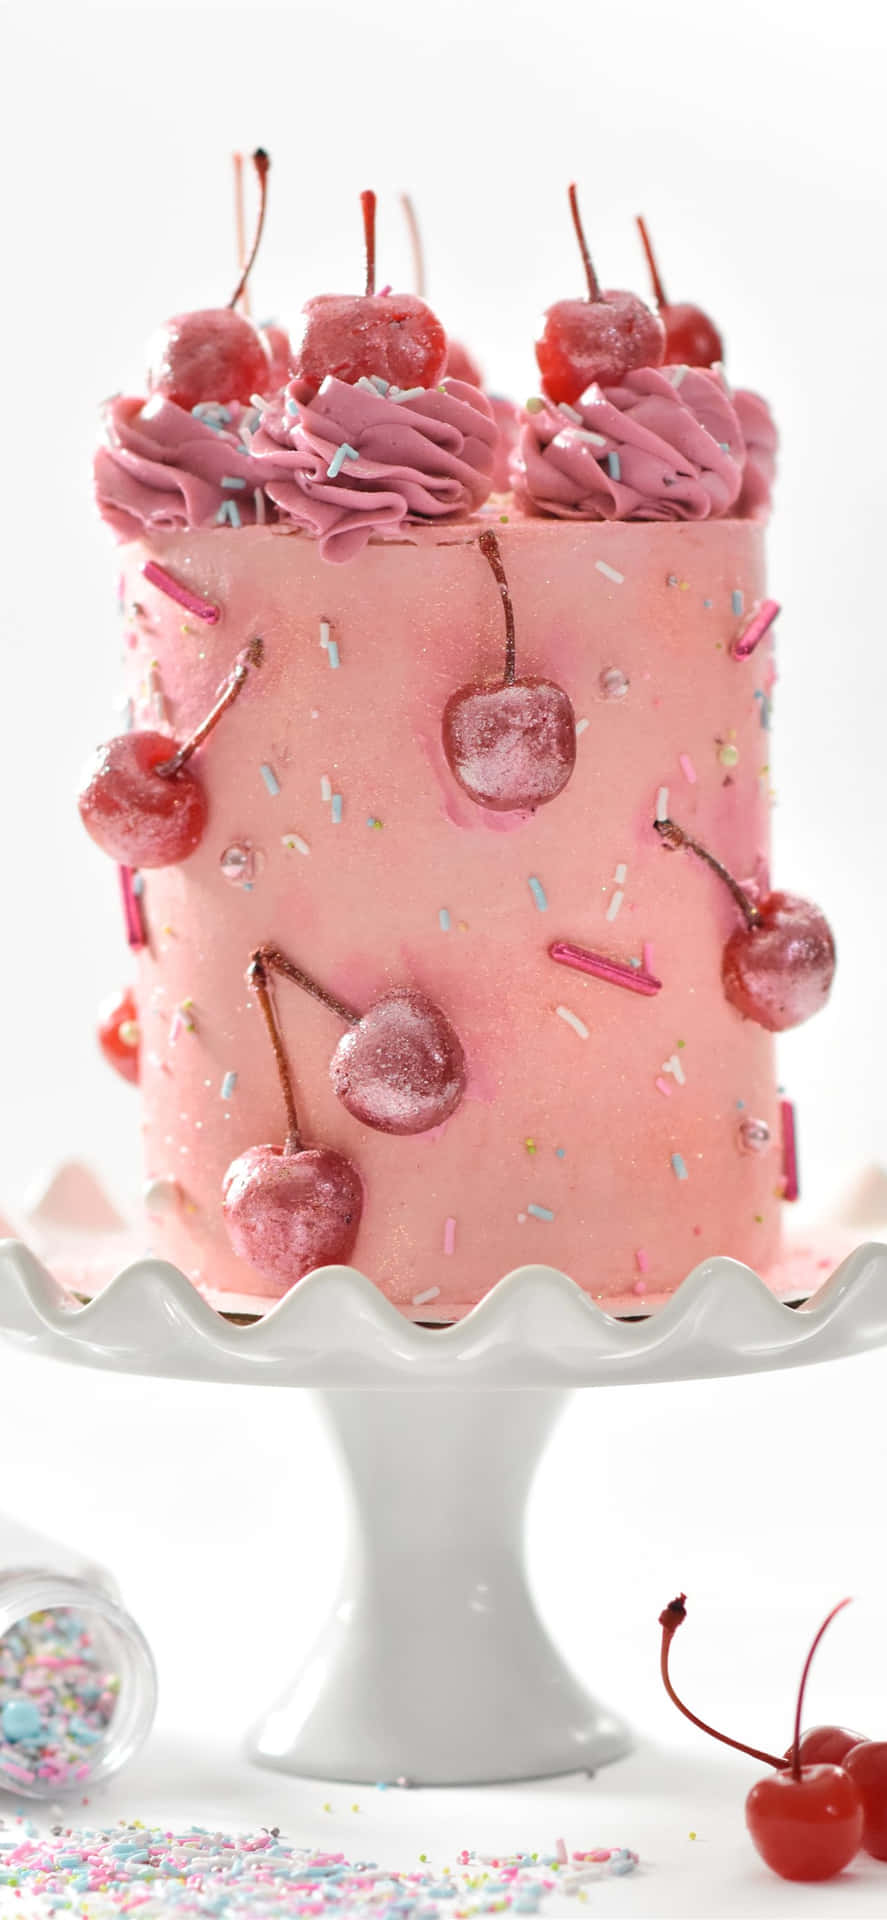 A Pink Cake With Cherries On Top Wallpaper